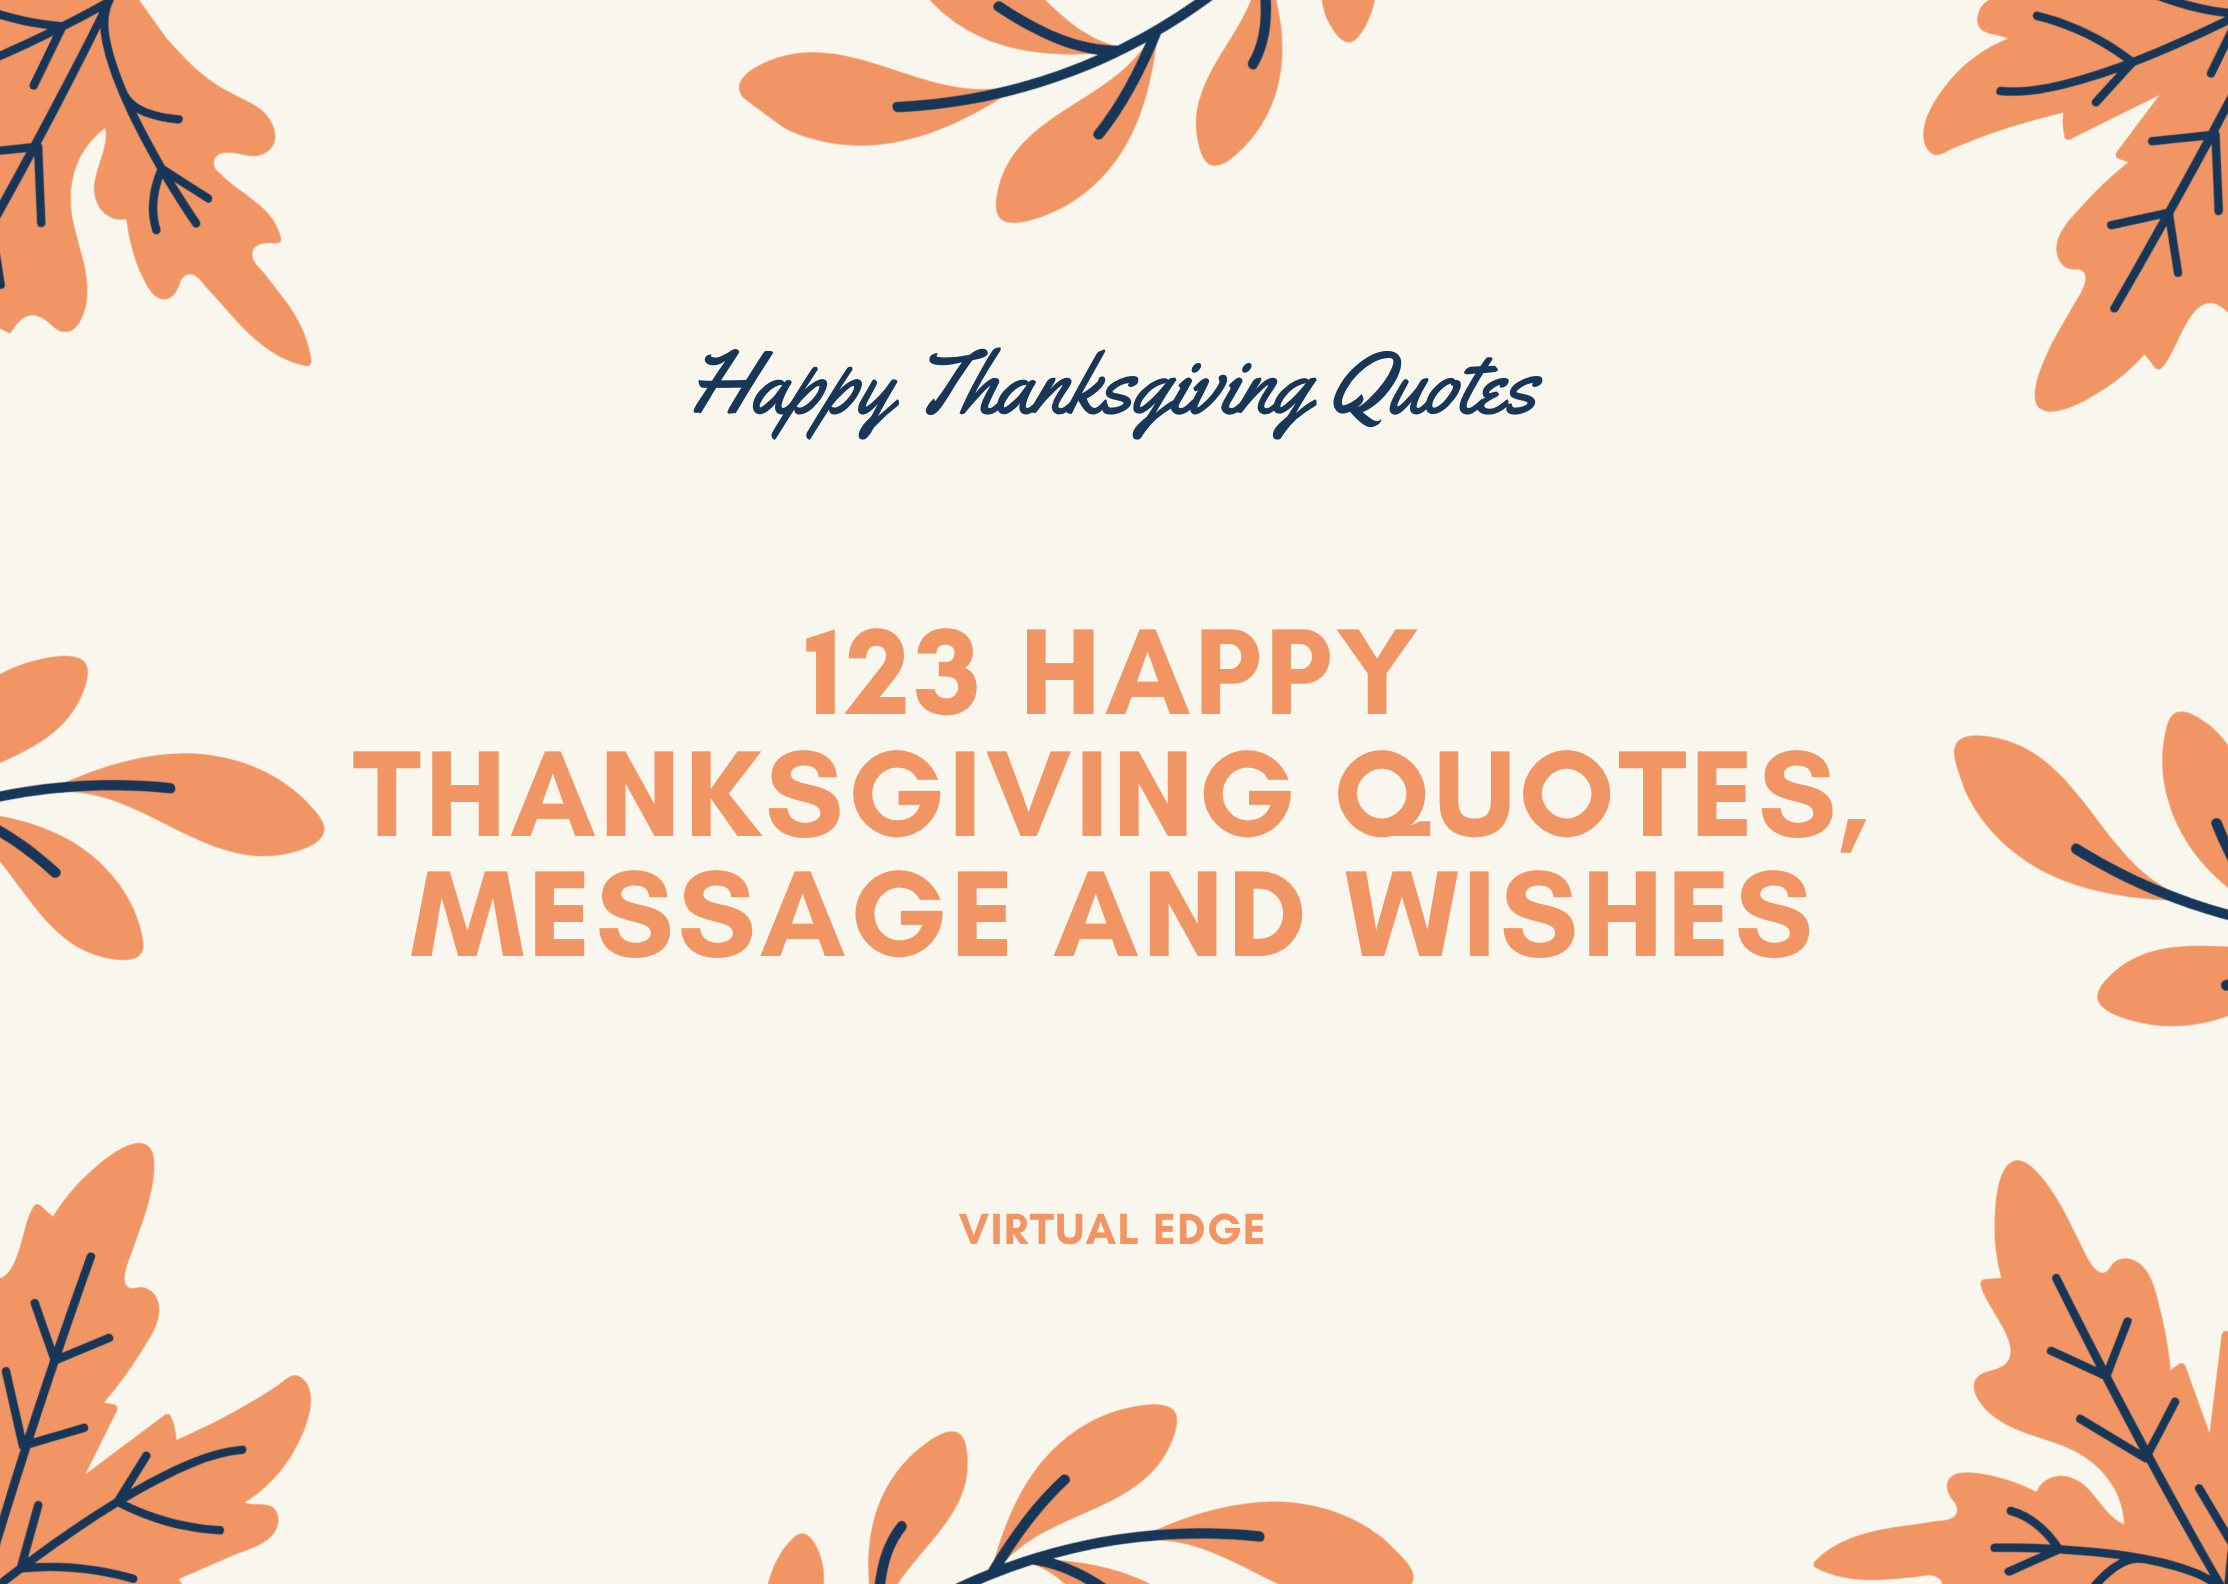 123 Happy Thanksgiving Quotes, Message and Wishes